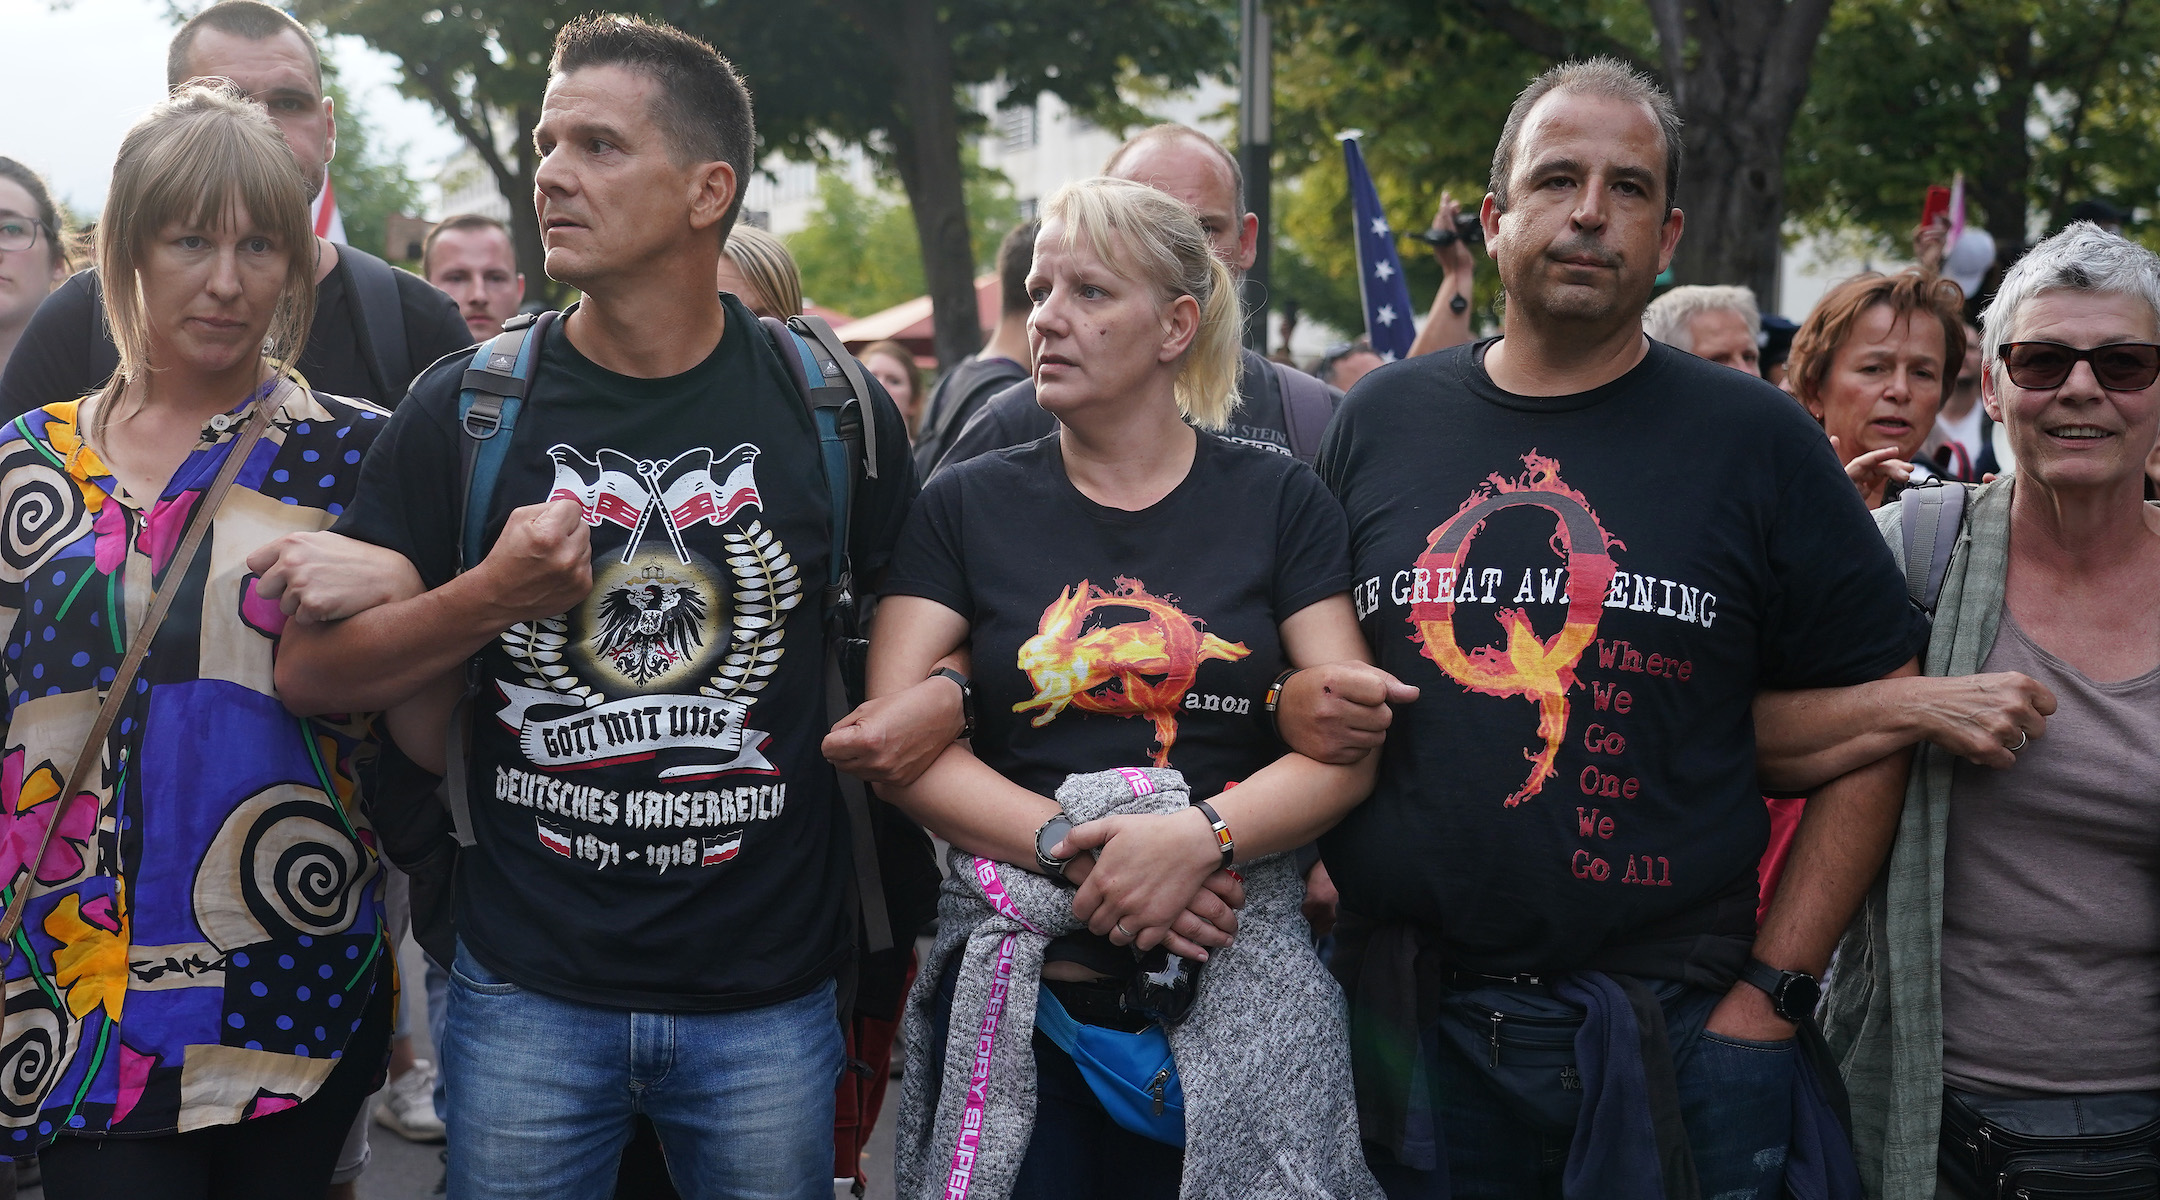 A group of Germans who follow the QAnon conspiracy theory protest in Berlin on August 29. That day, inspired by QAnon, a group of German extremists stormed the country's parliament. (Sean Gallup/Getty Images)